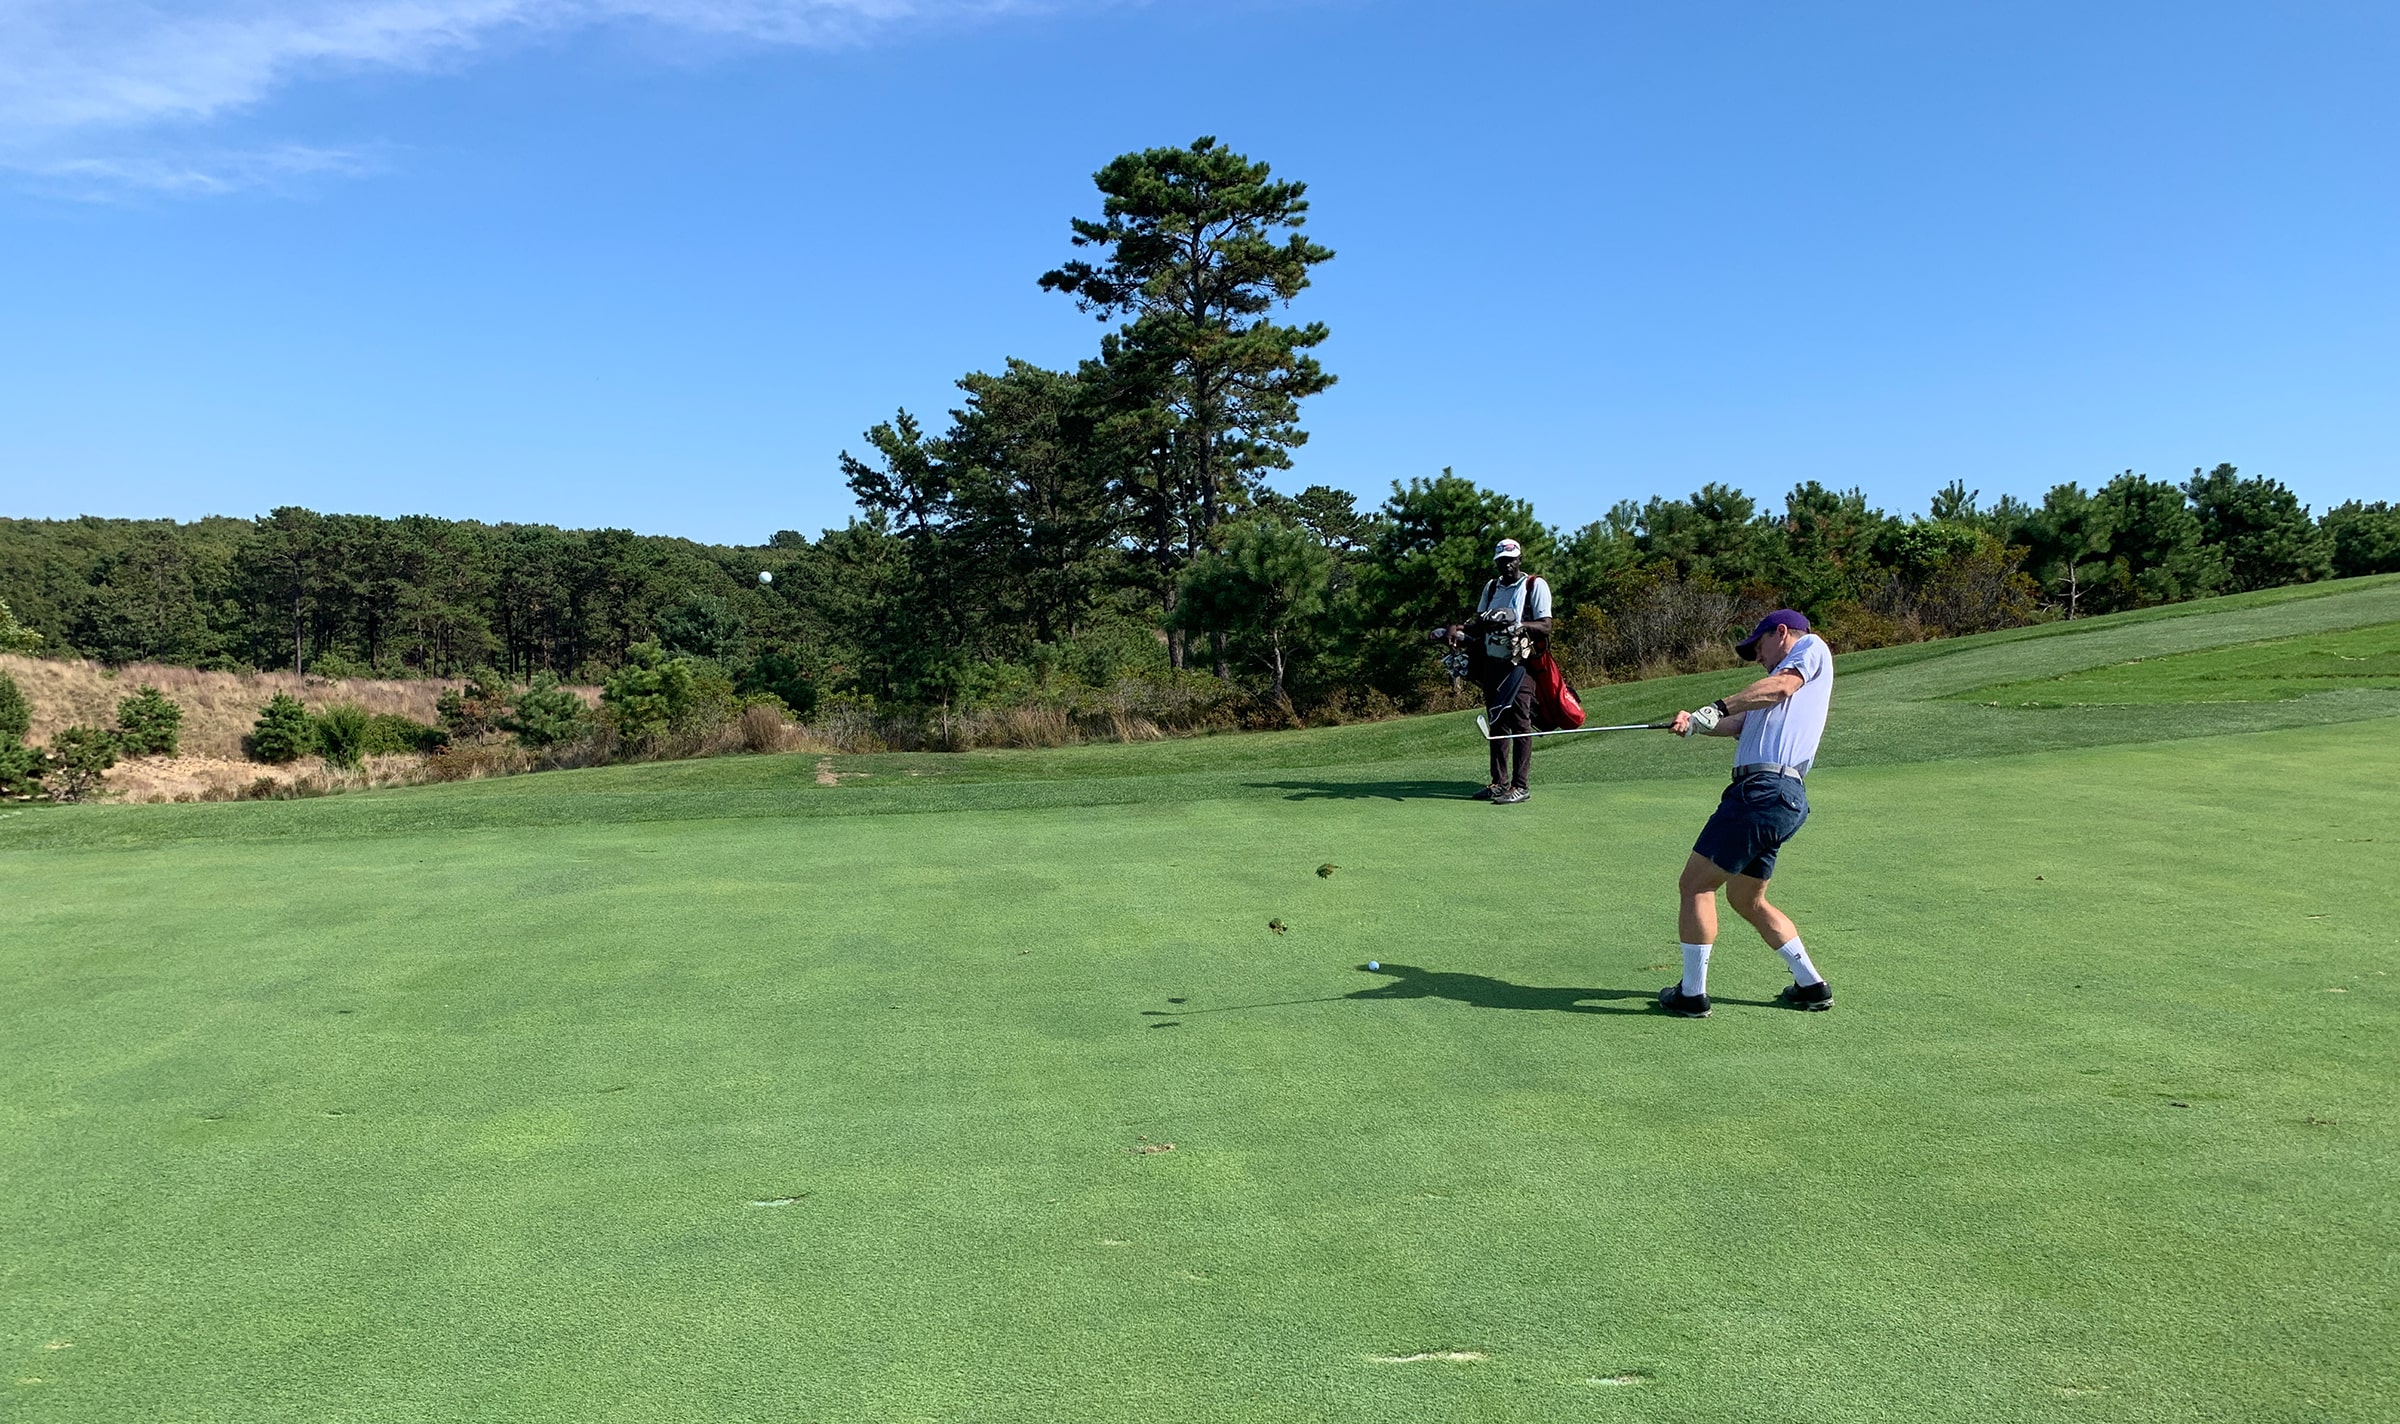 2019 Friends of the Foundation Tournaments at The Bridge